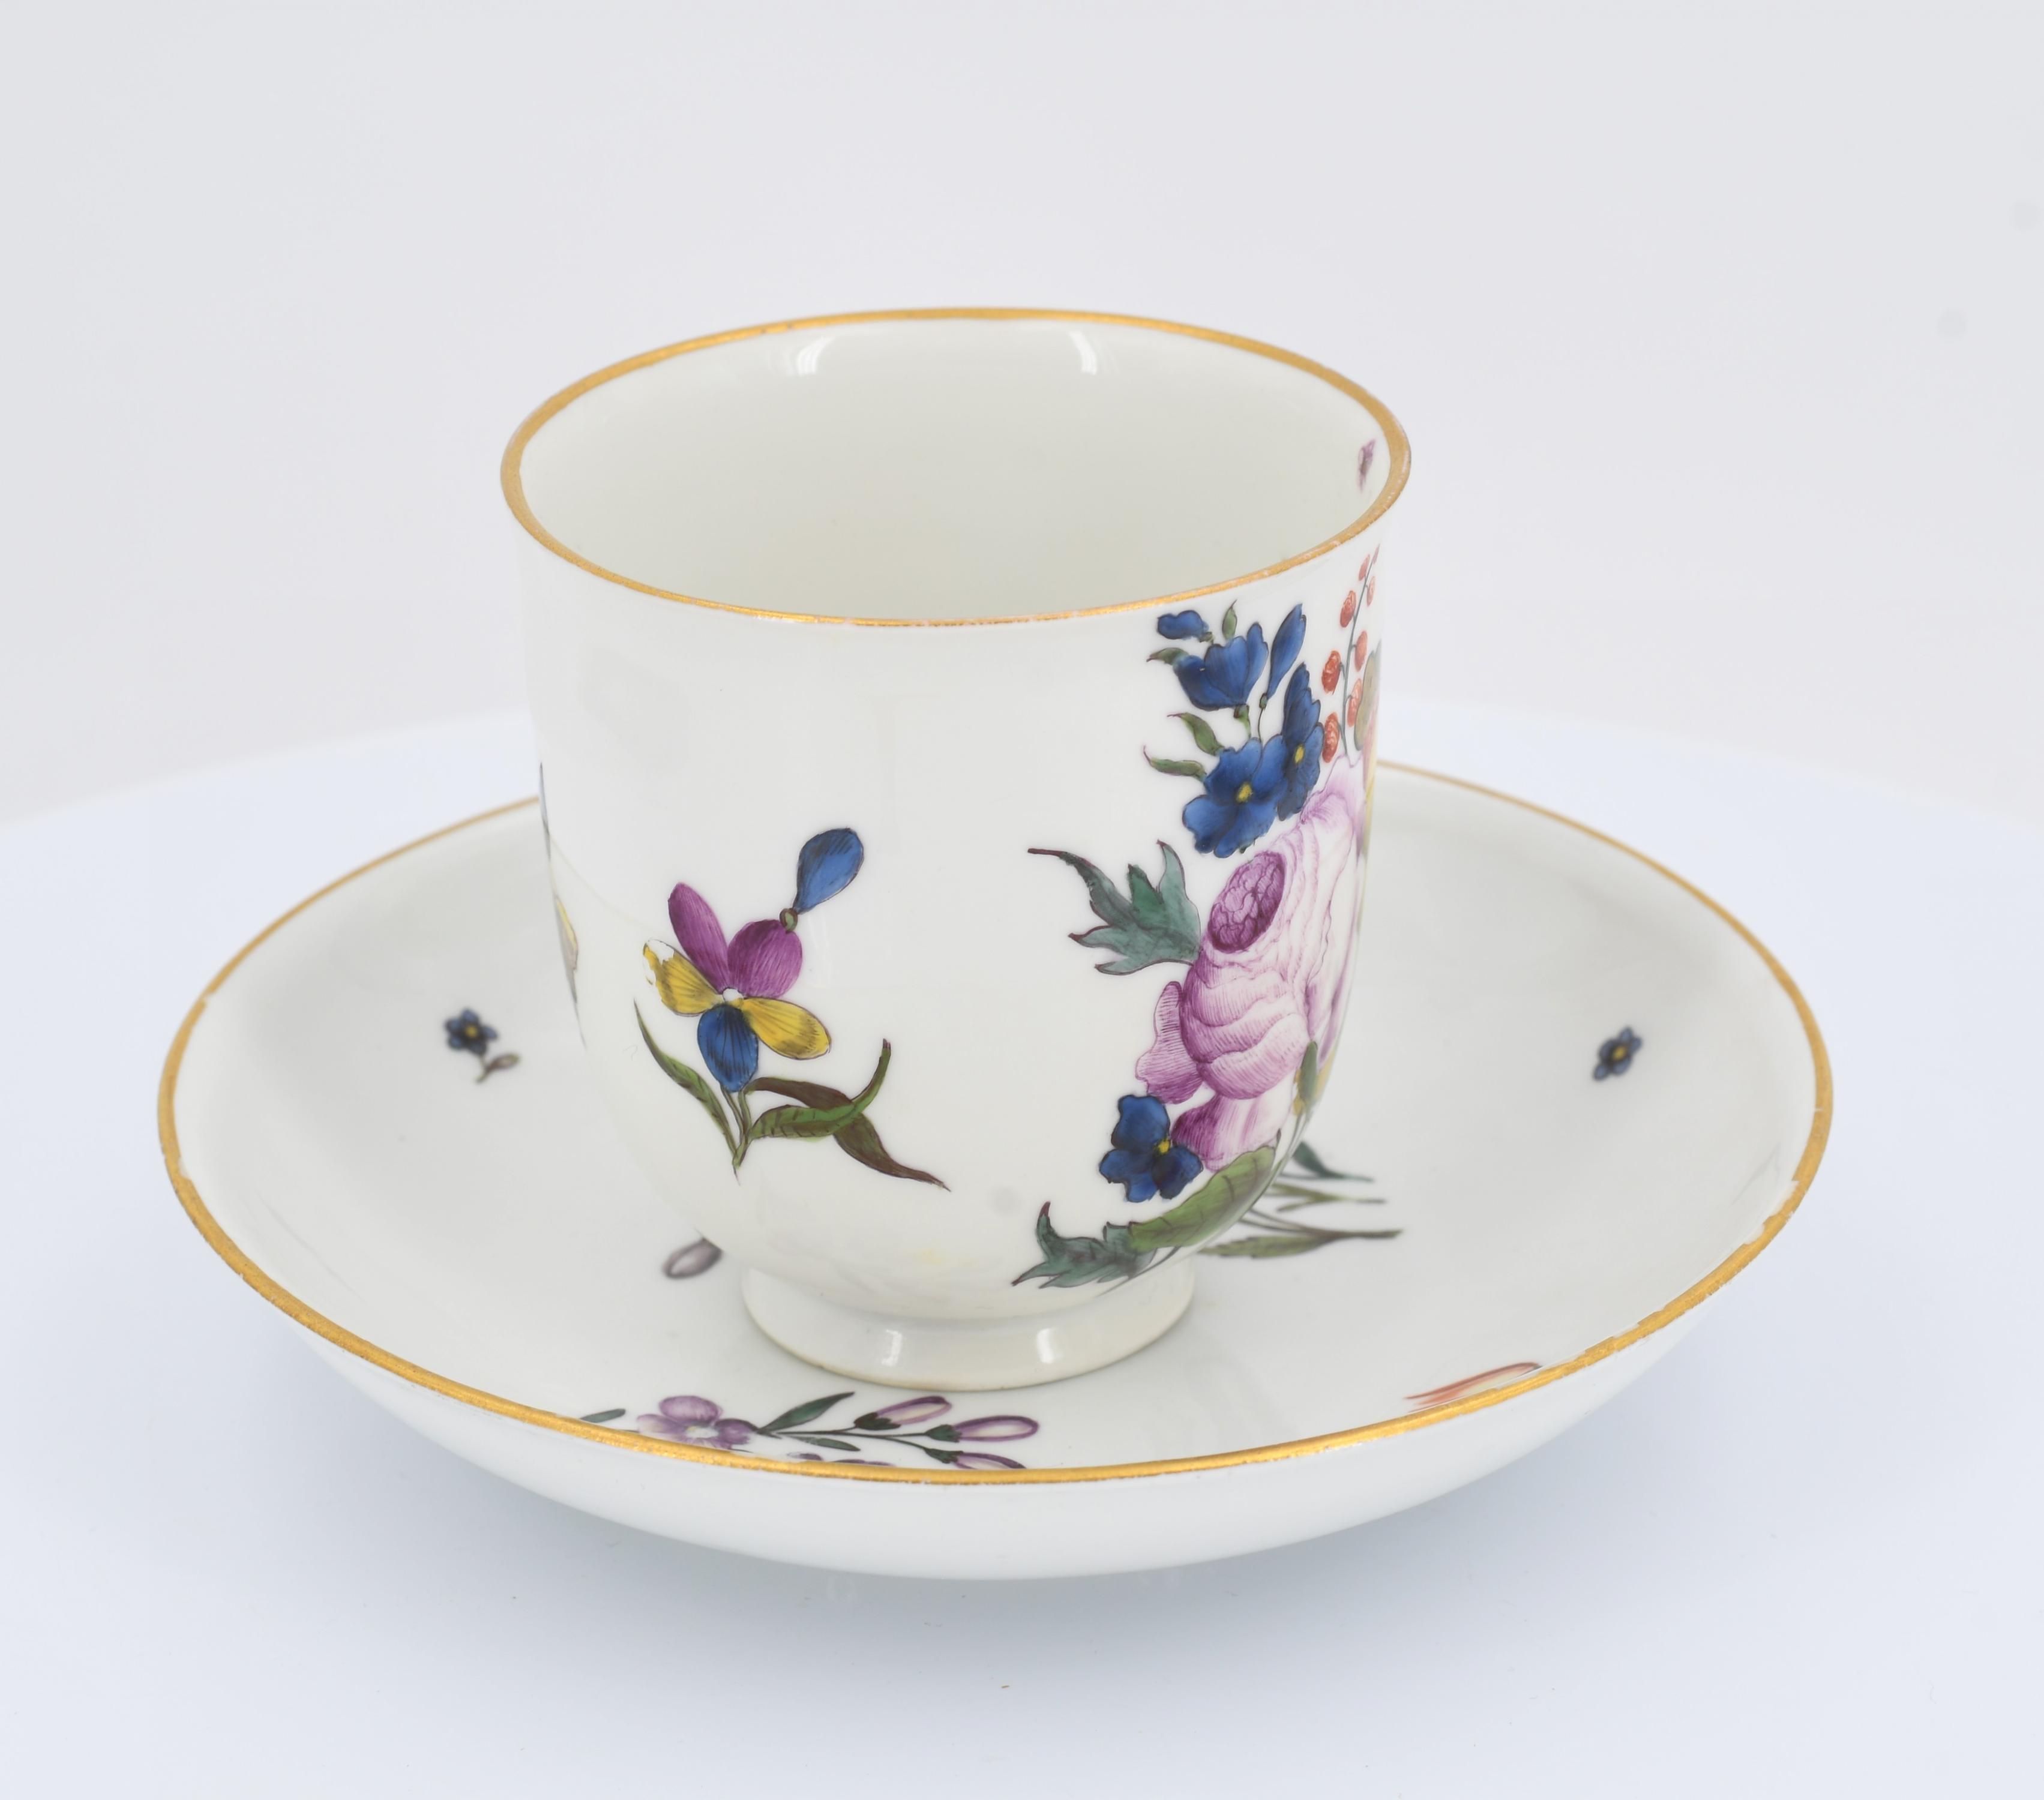 Cup and saucer with floral décor - Image 5 of 7